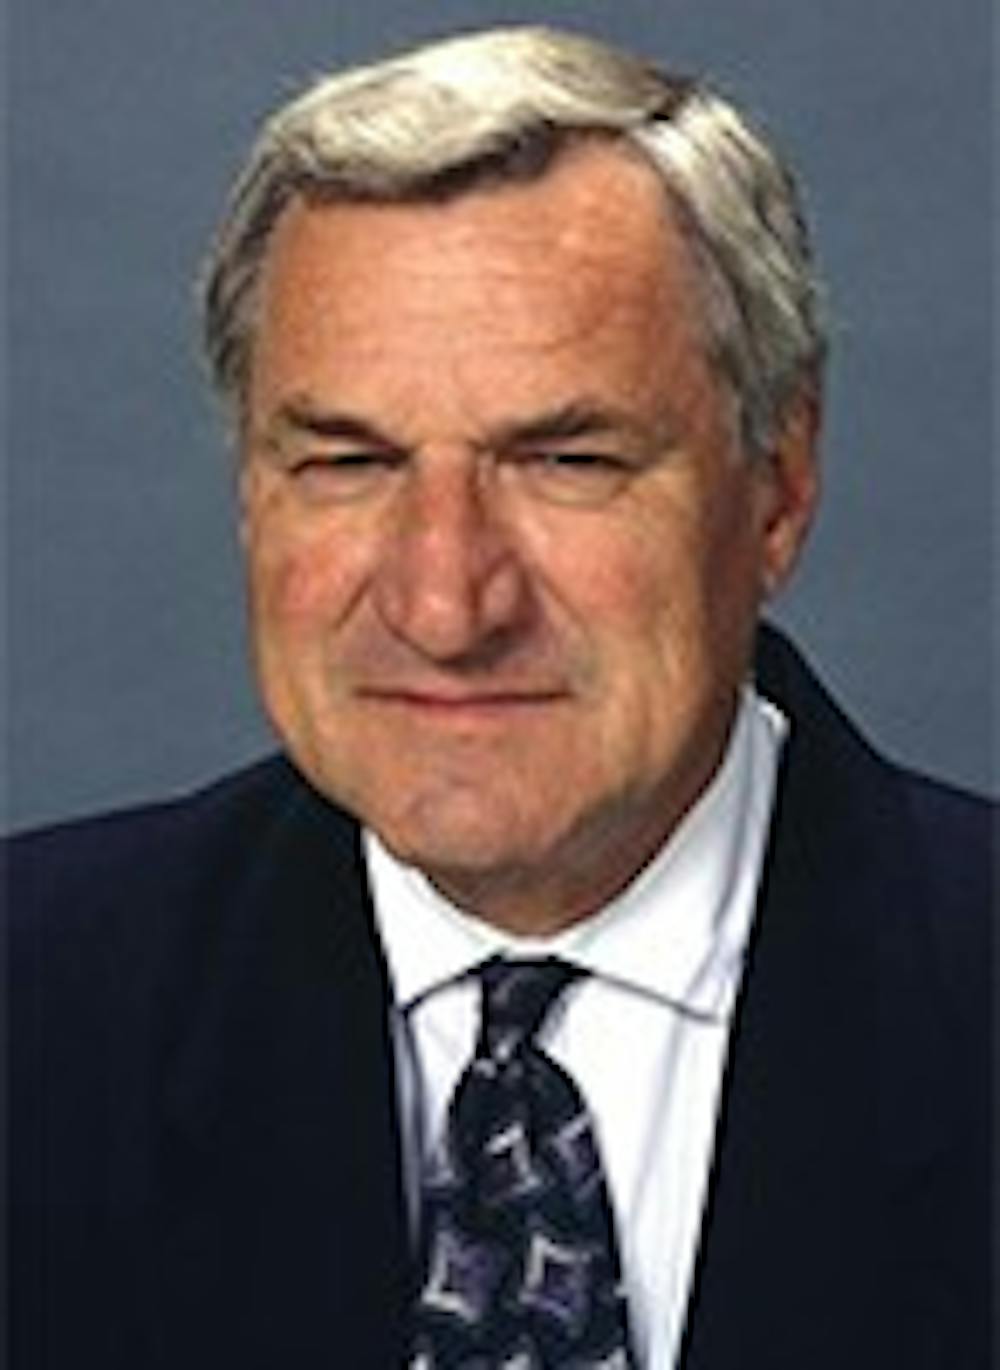 	<p>Dean Smith coached at <span class="caps">UNC</span> for 36 years and earned 879 wins. He is receiving the Medal of Freedom today.</p>